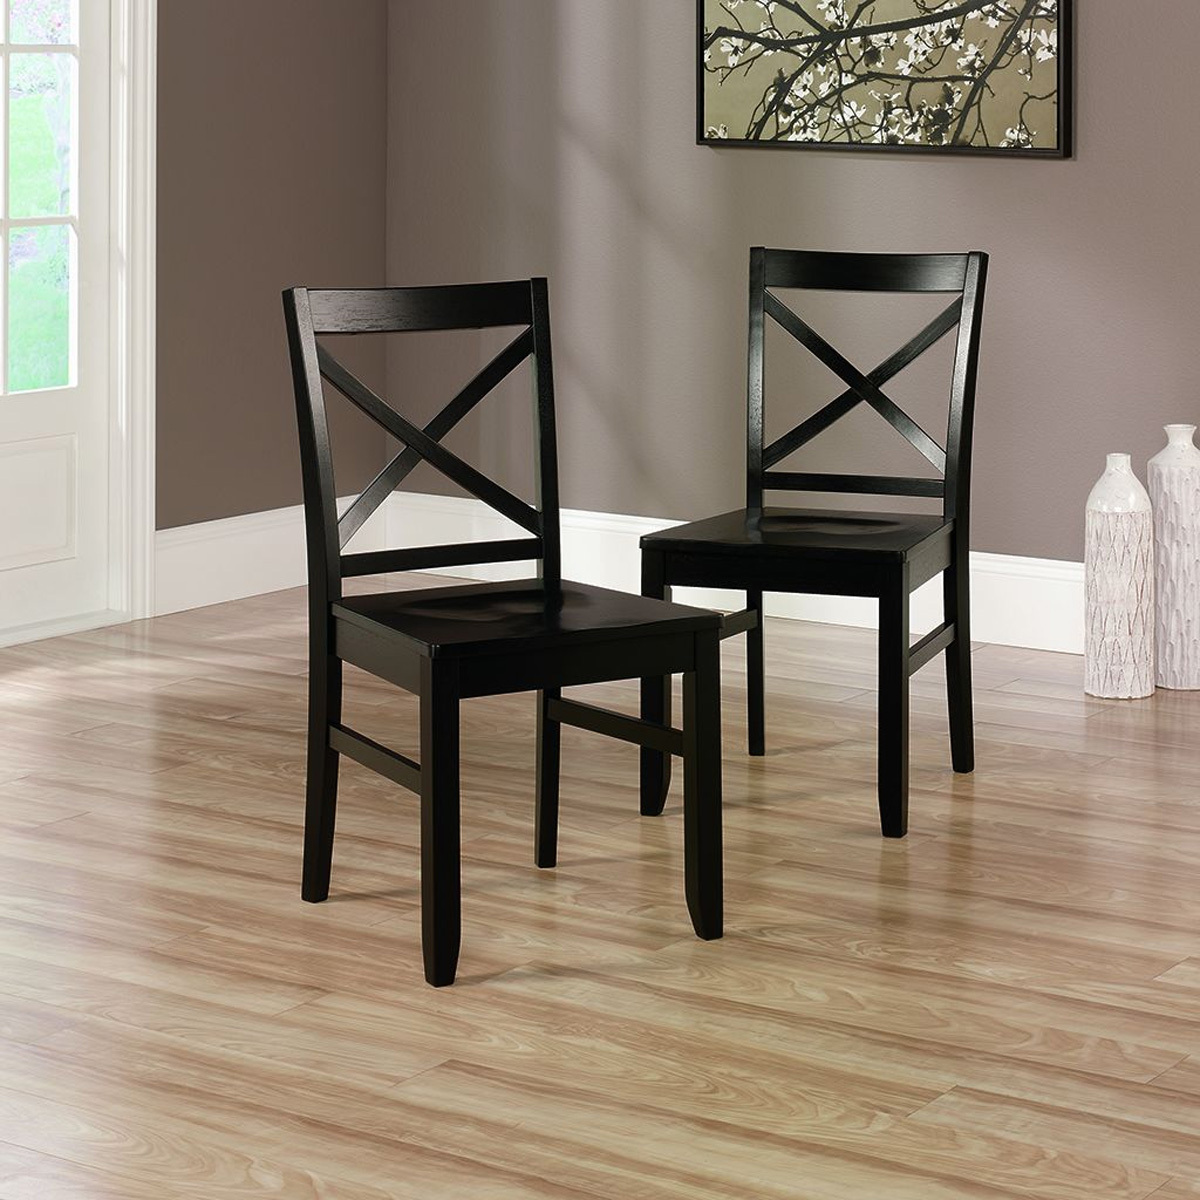 Sauder Harbor View X Back Chair Set of Two (415236) – The Furniture Co.